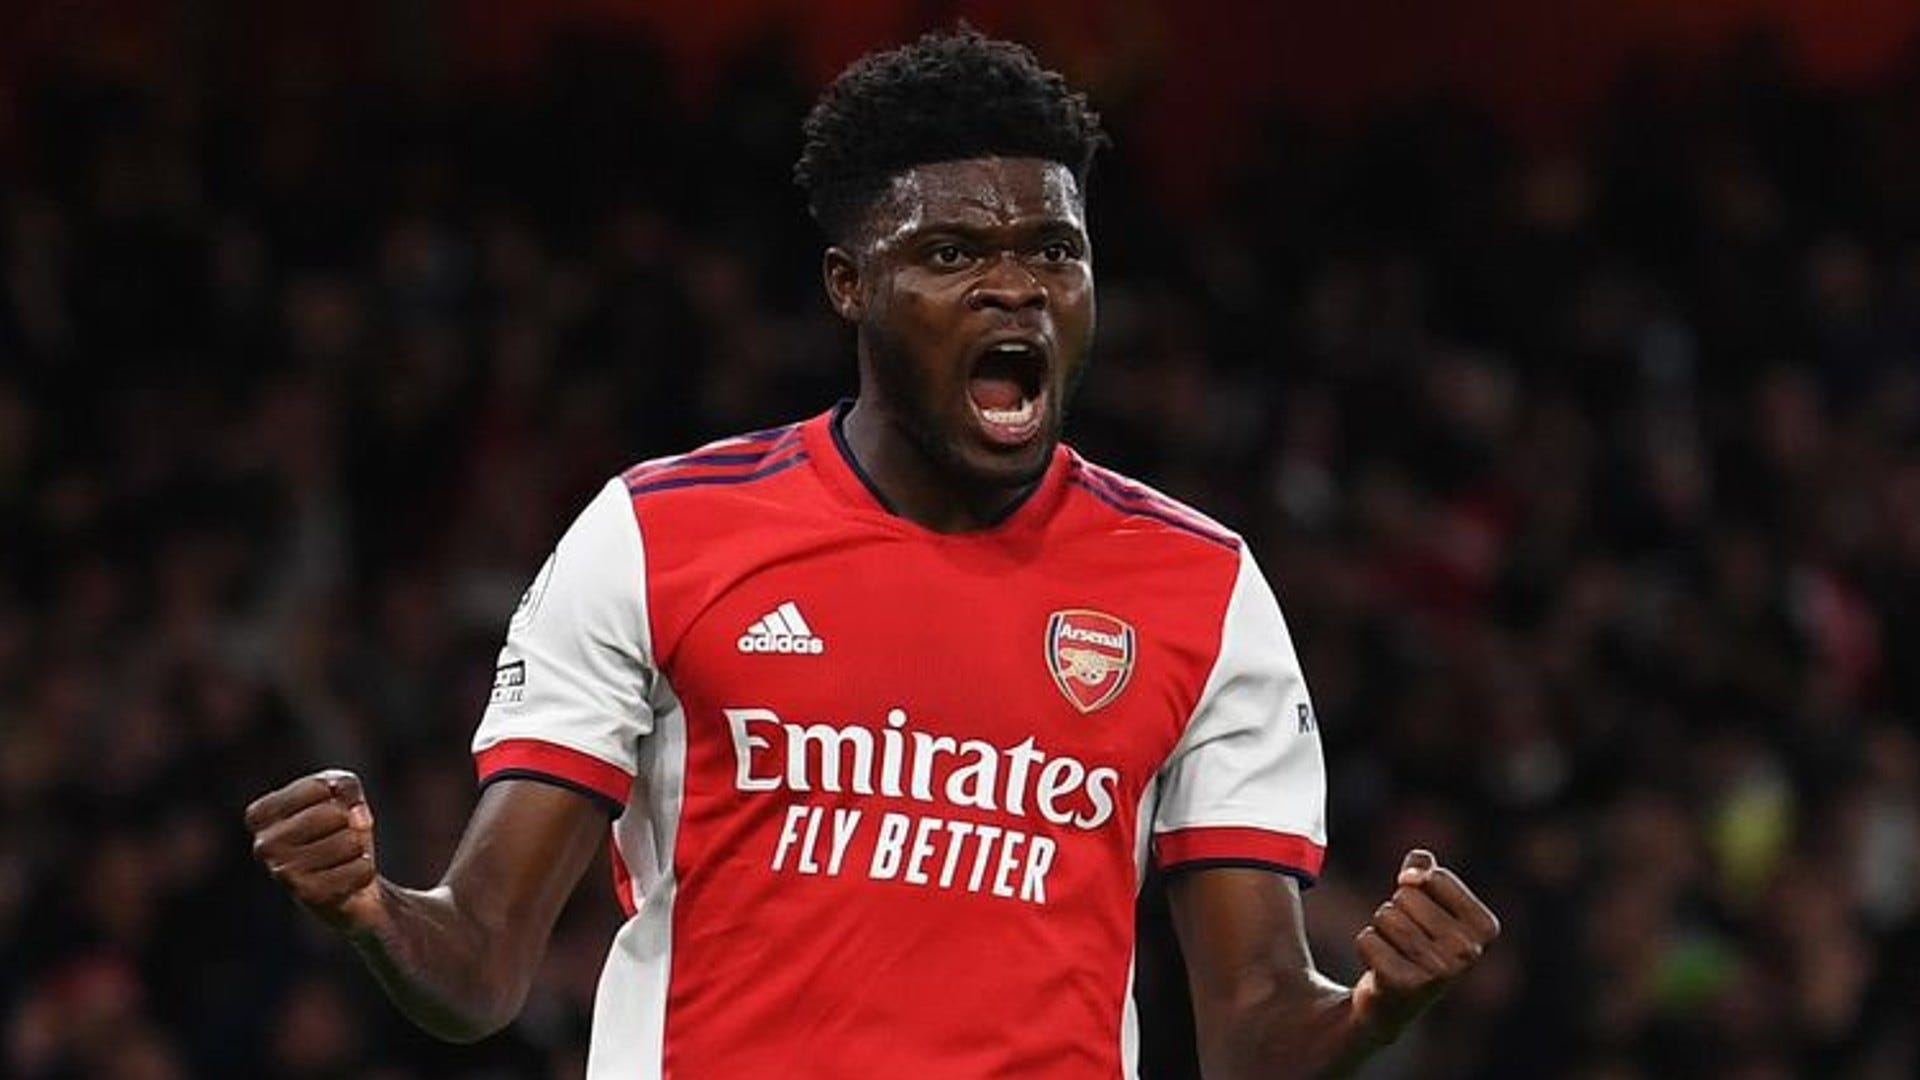 "He Can Be Bought" - Arsenal Told To Sign This £50m Player As Thomas Partey's Replacement 